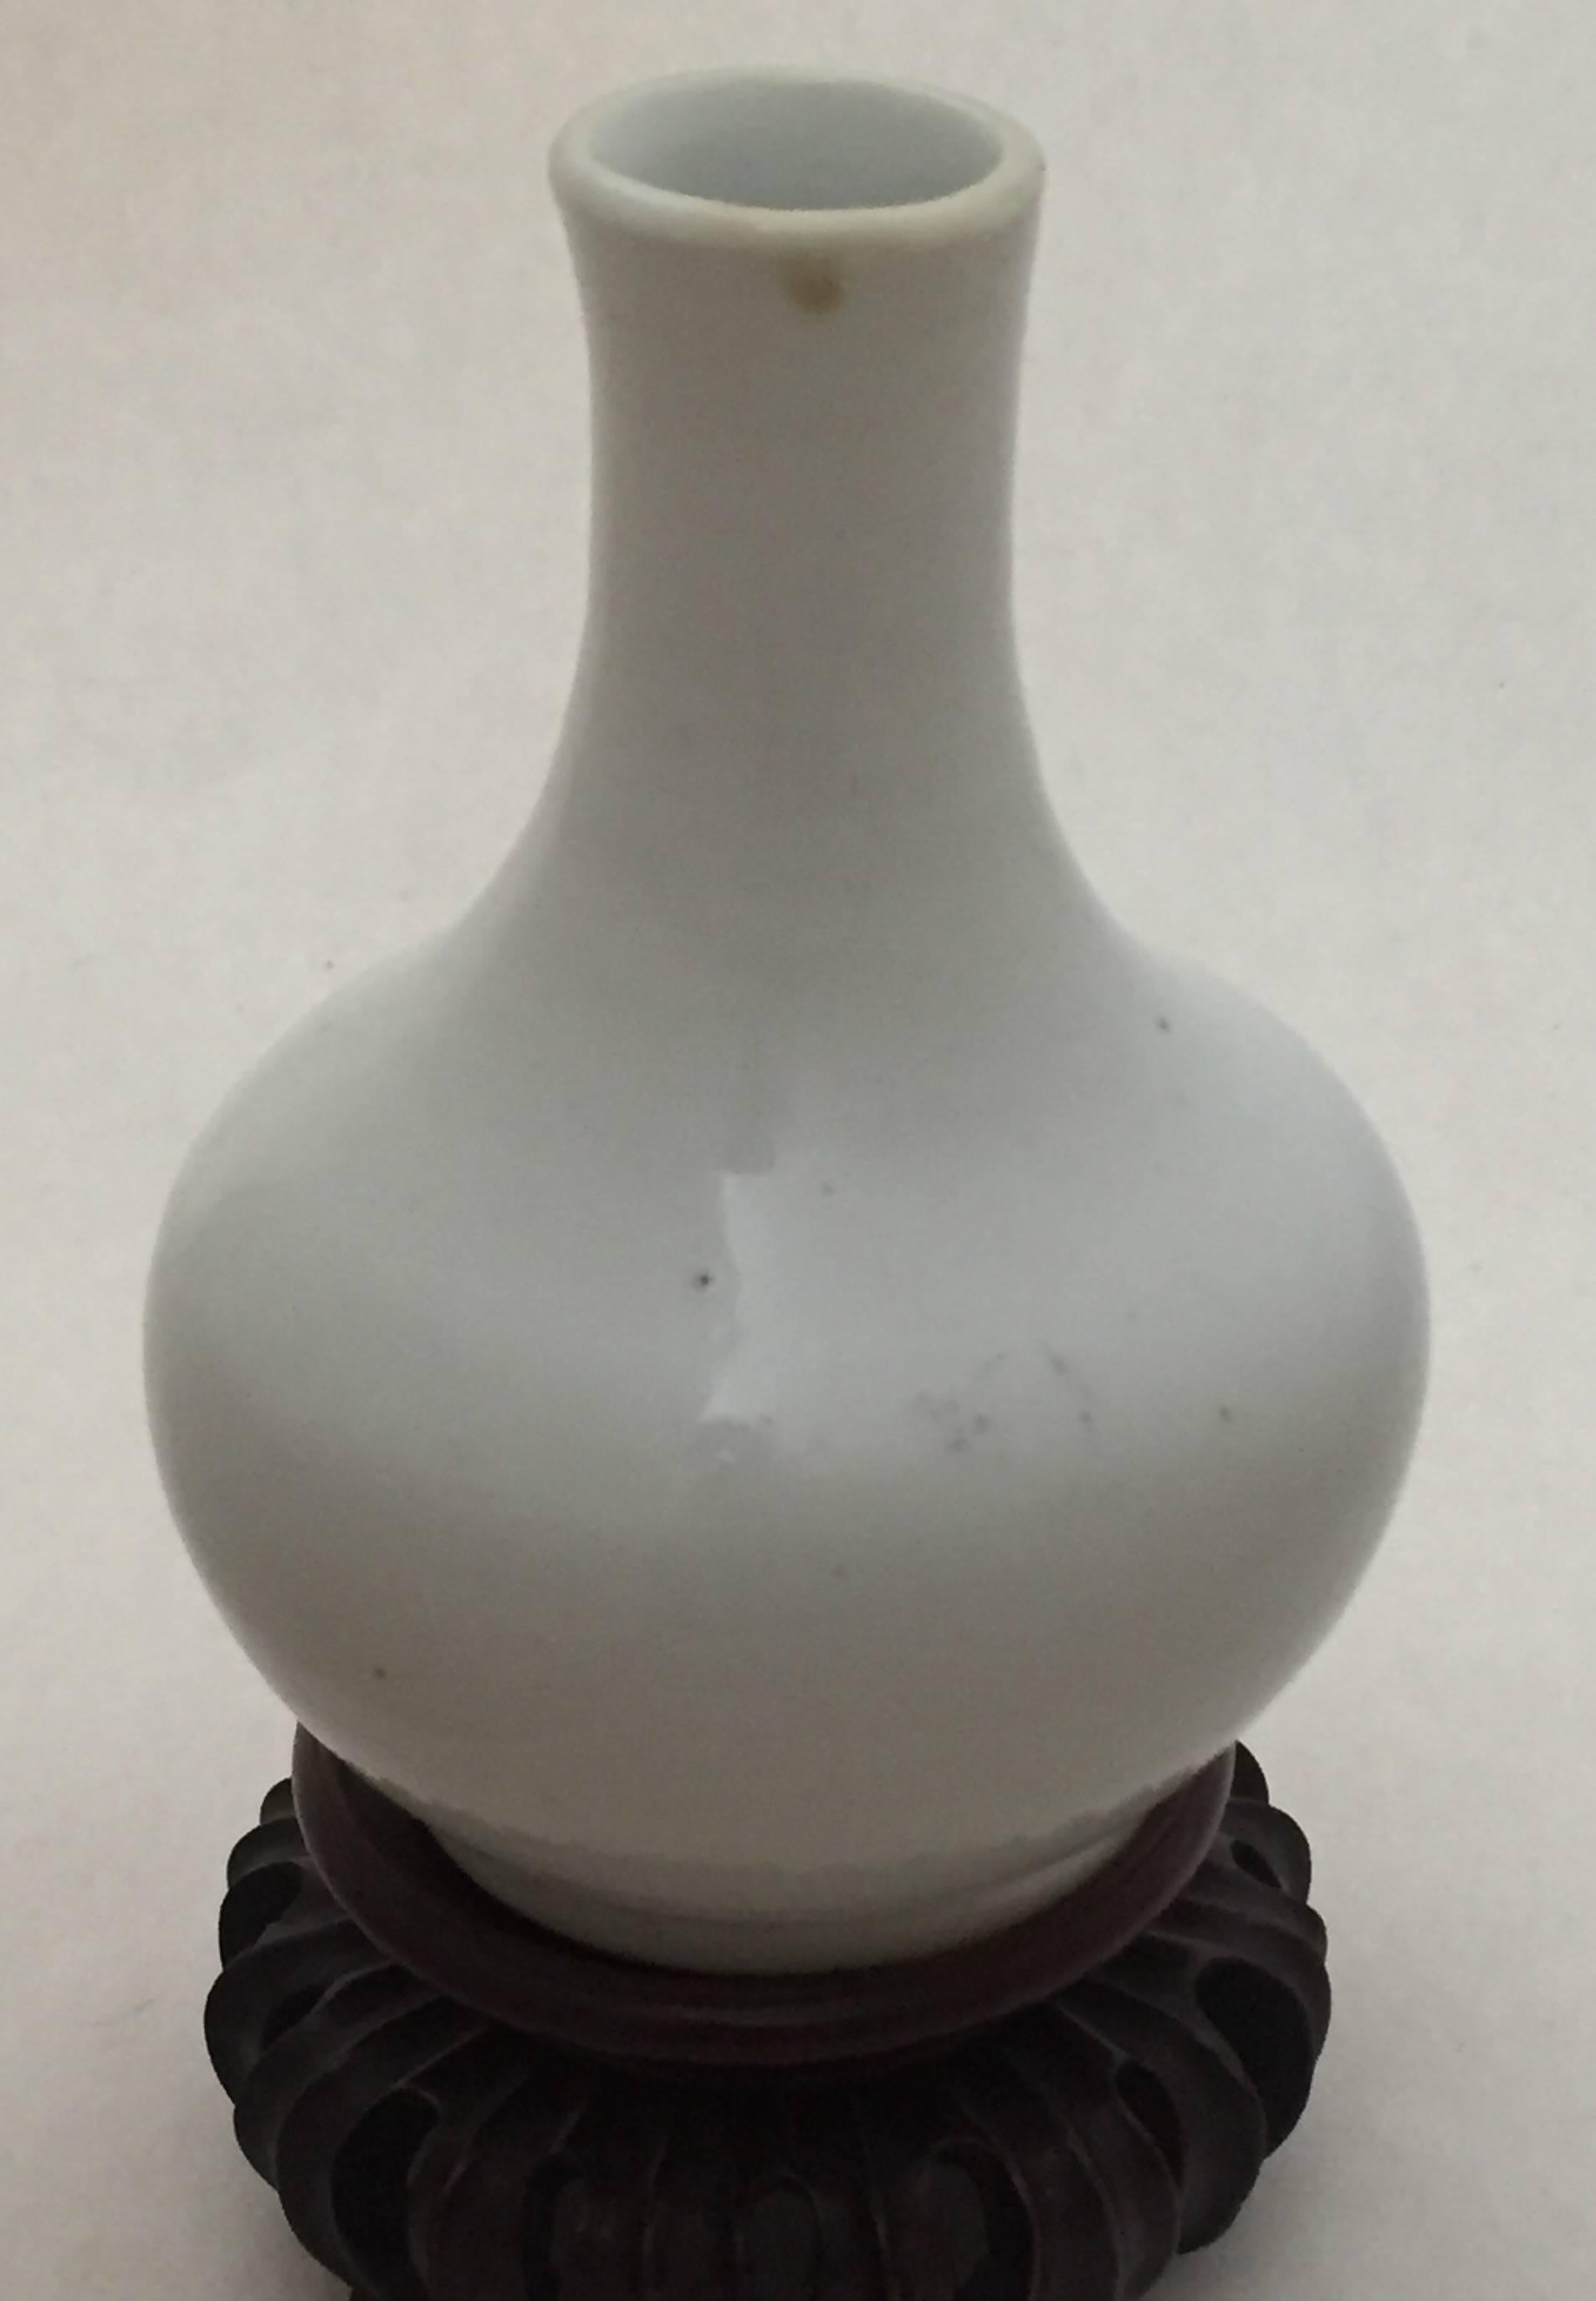 17th-18th century Chinese small tianqiuping vase monochrome white
A rare miniature tianqiuping vase most likely made during the transitional or Kangxi period. The vase has a frit to the base ring see image no 8 and there is a brownish glaze drop to